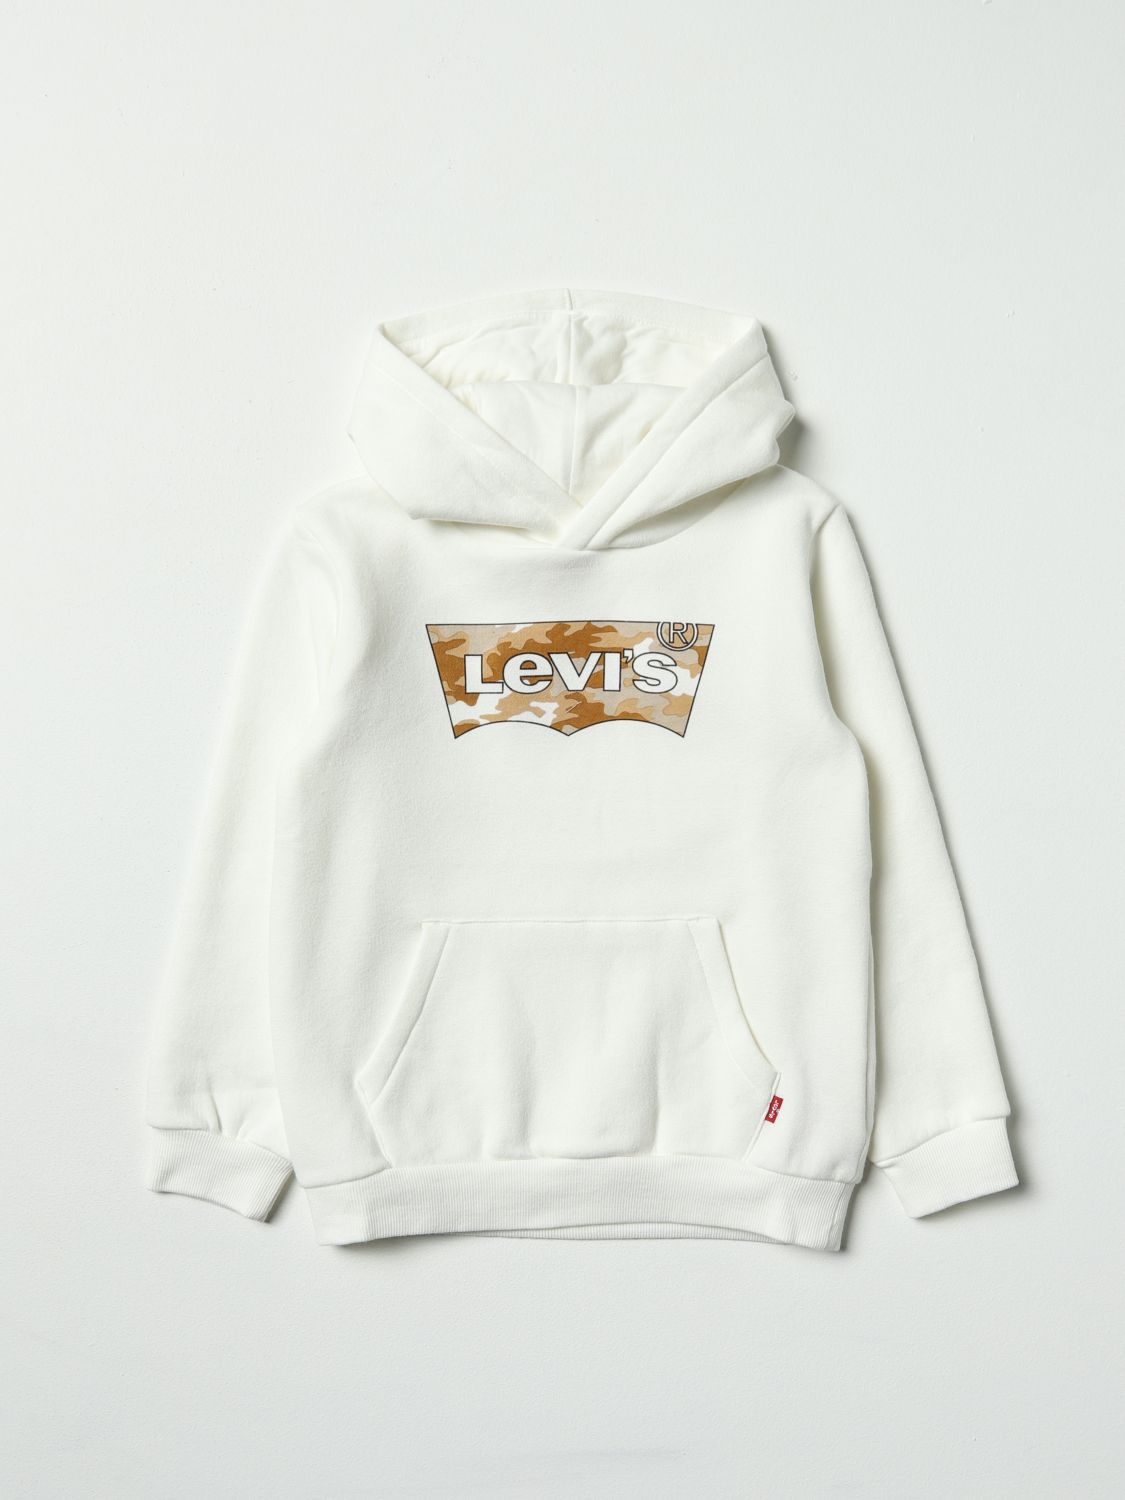 LEVI'S: sweater for boys - White | Levi's sweater 8EE577 online on ...